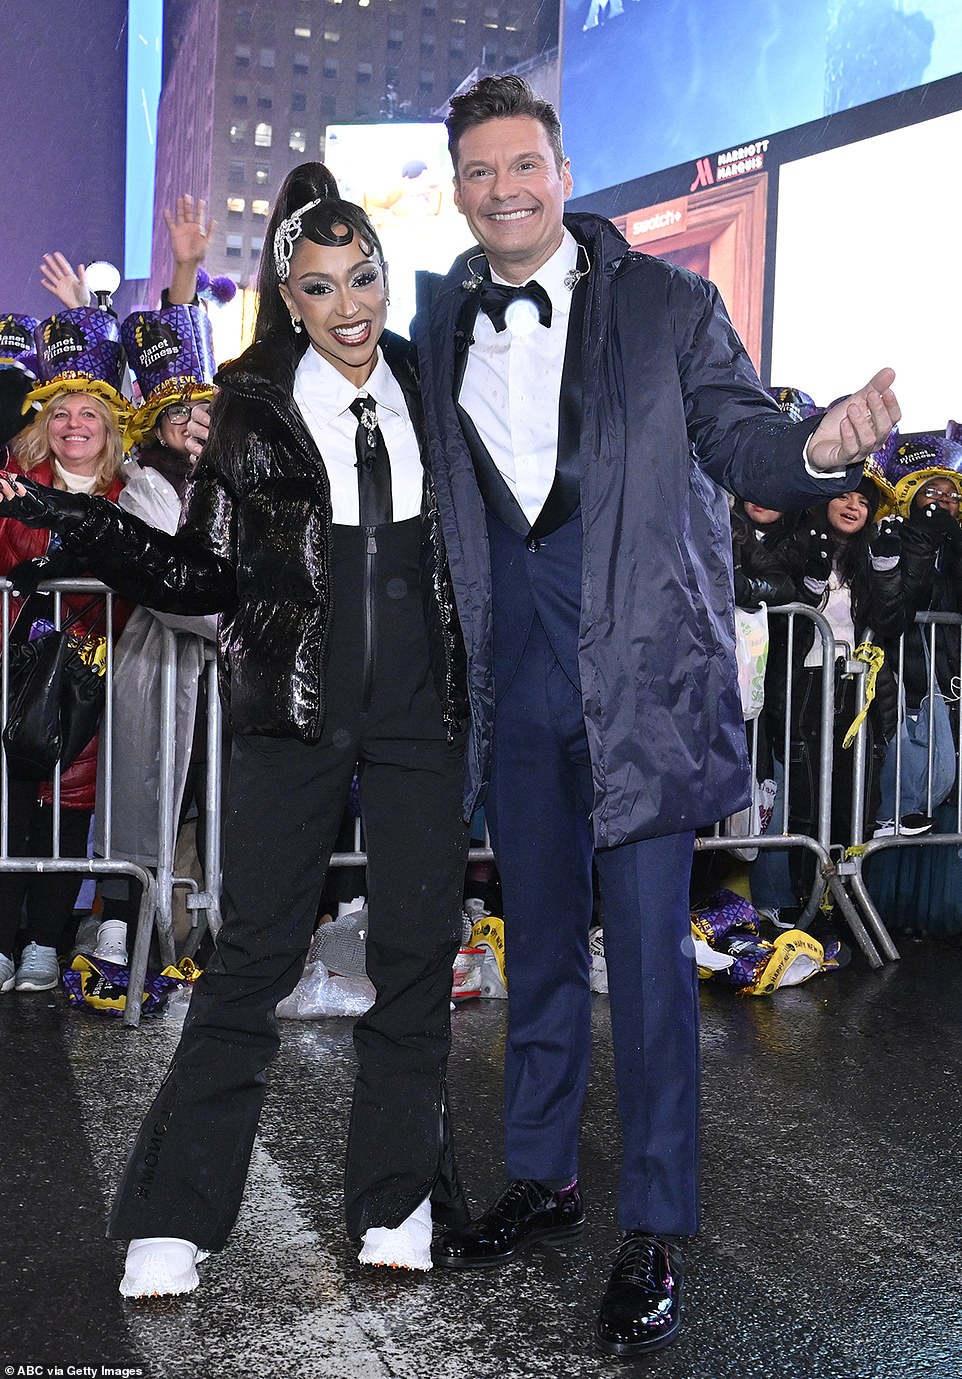 Dick Clarks Primetime 2023 New Years Rockin Eve Halle Bailey And Dove Cameron Perform 